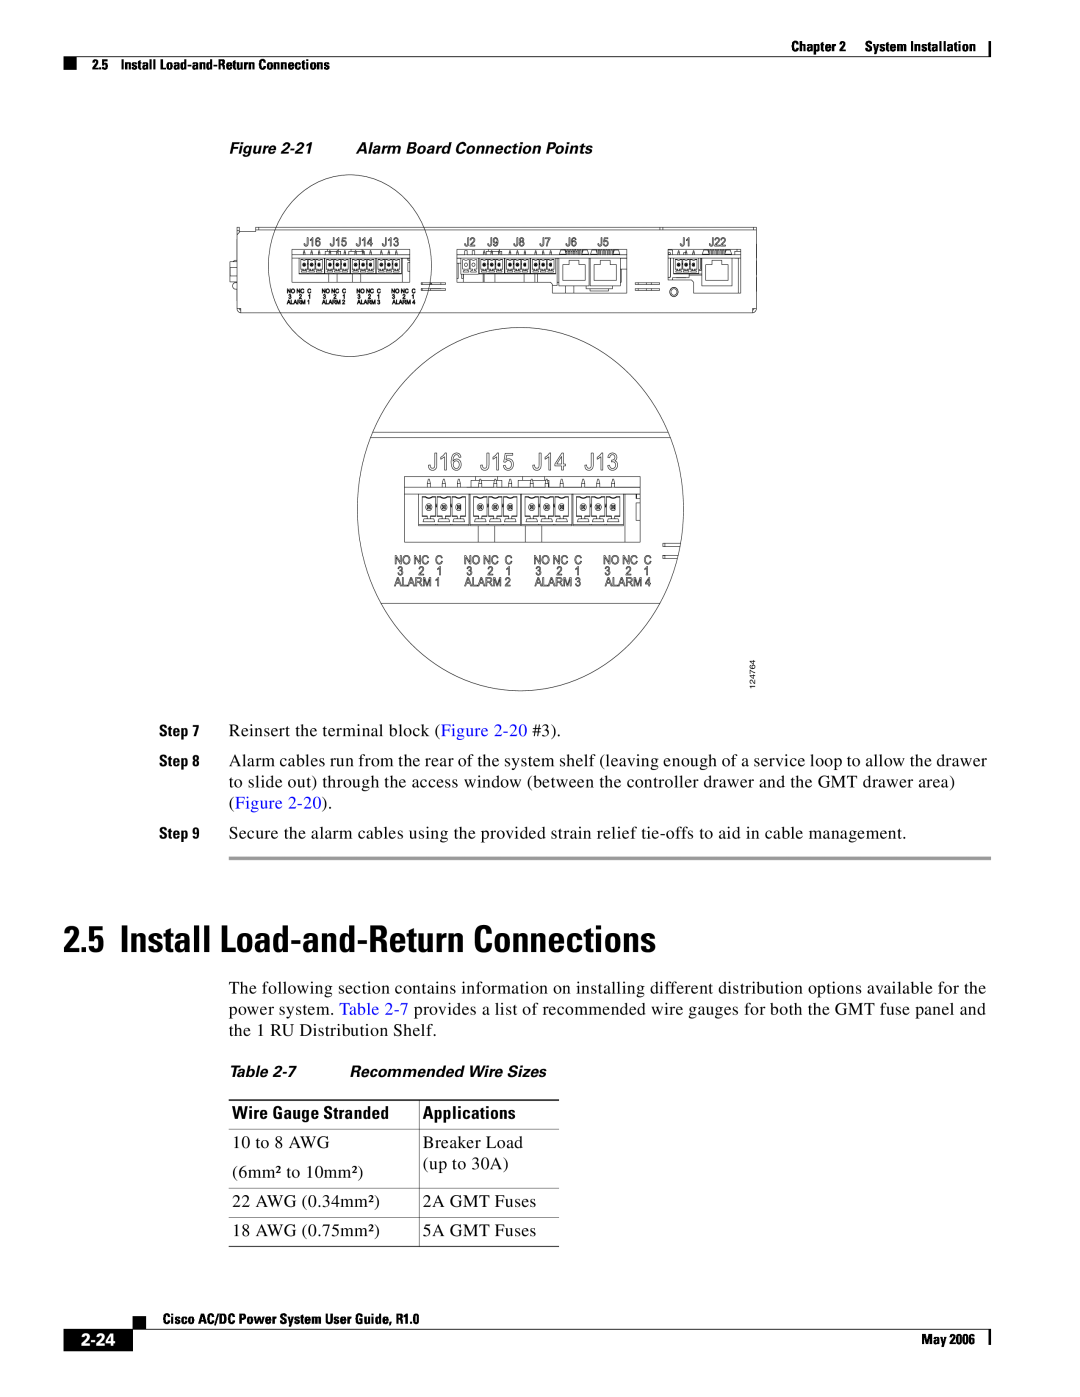 Cisco Systems 124778, 124792, 159330 manual Install Load-and-Return Connections, 2-24, Wire Gauge Stranded, Applications 